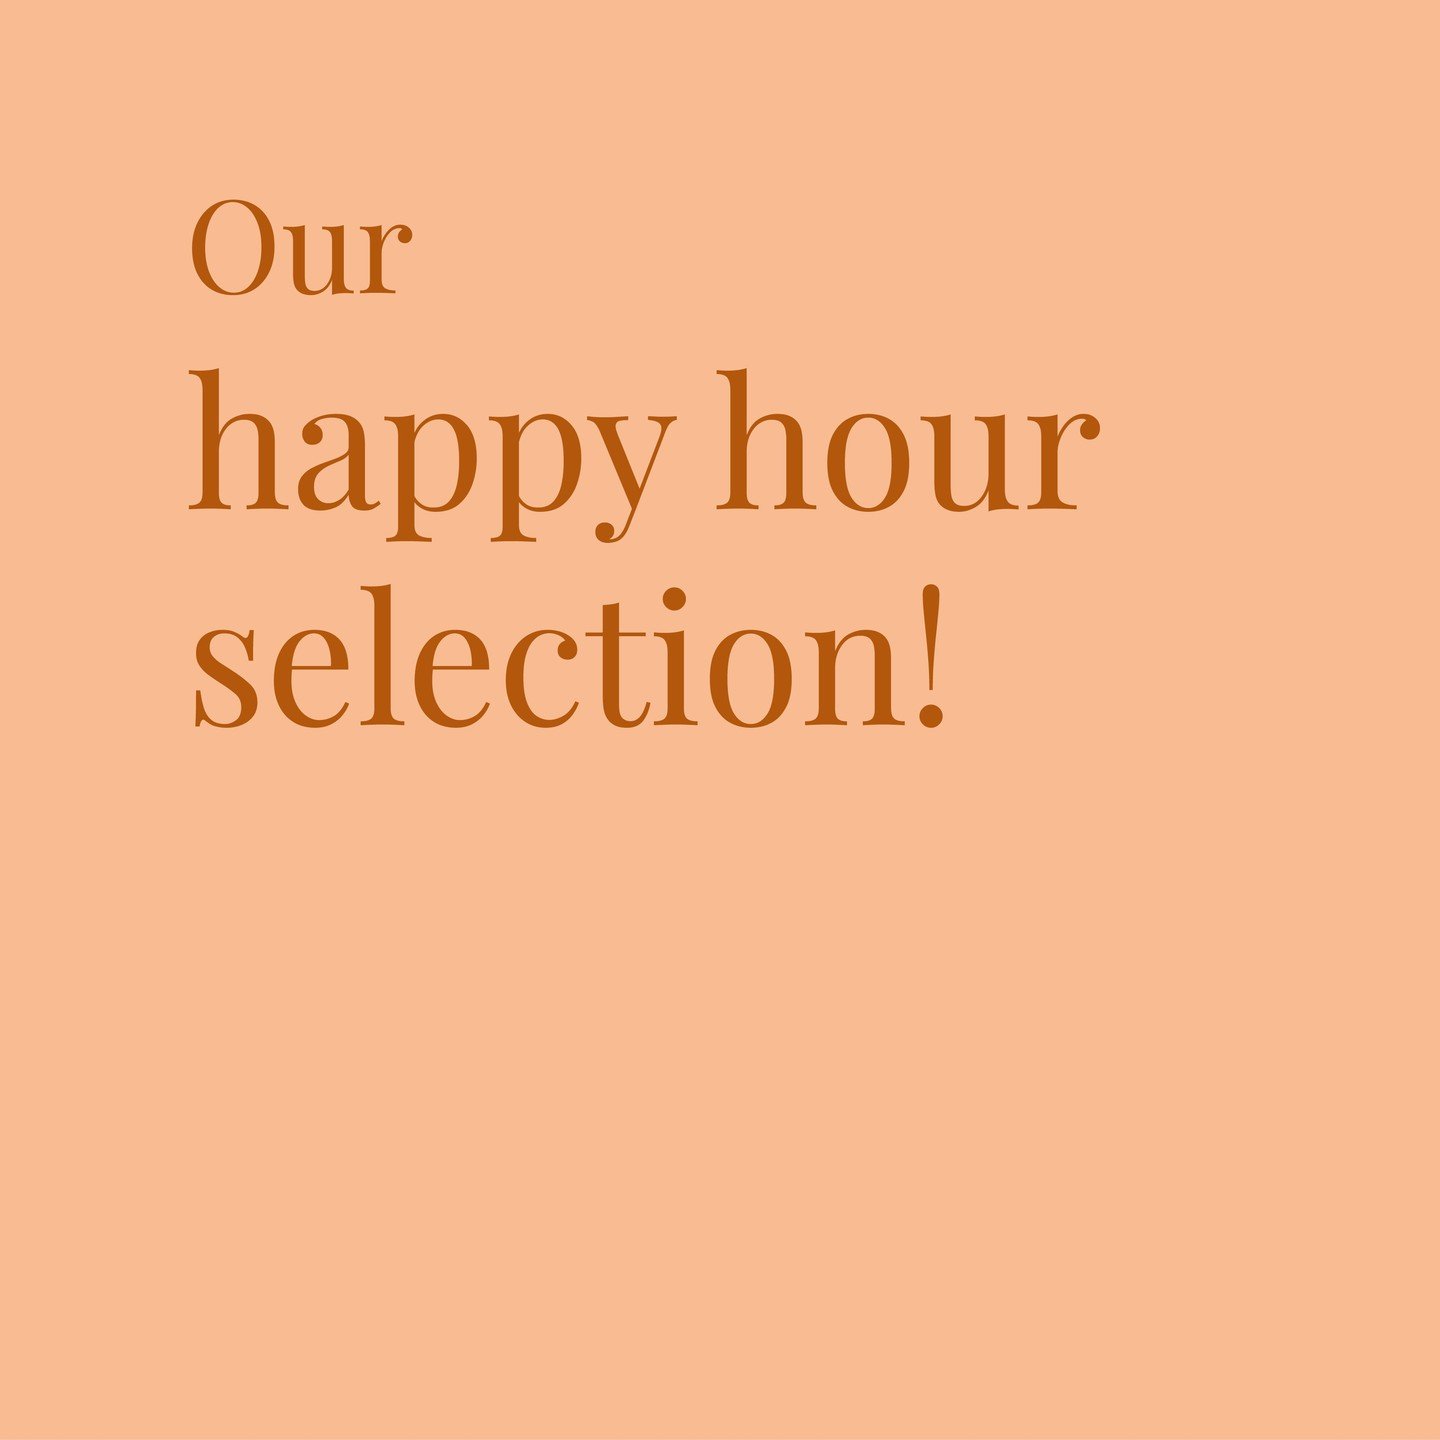 This week, discover our happy hour specials!

#happyhour #nyc #Happyhournyc #smallestate